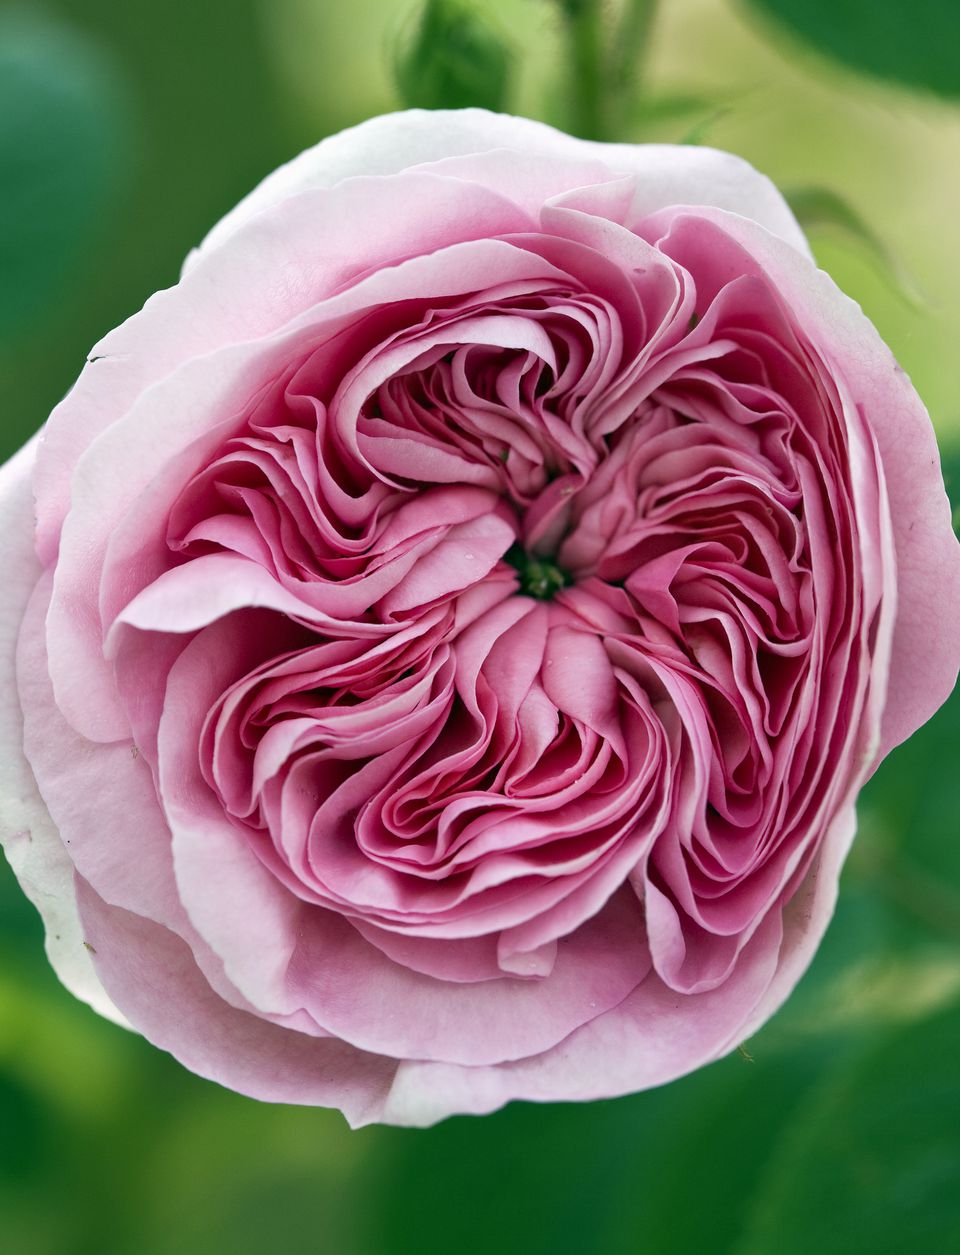 Lush English Roses for Your Garden